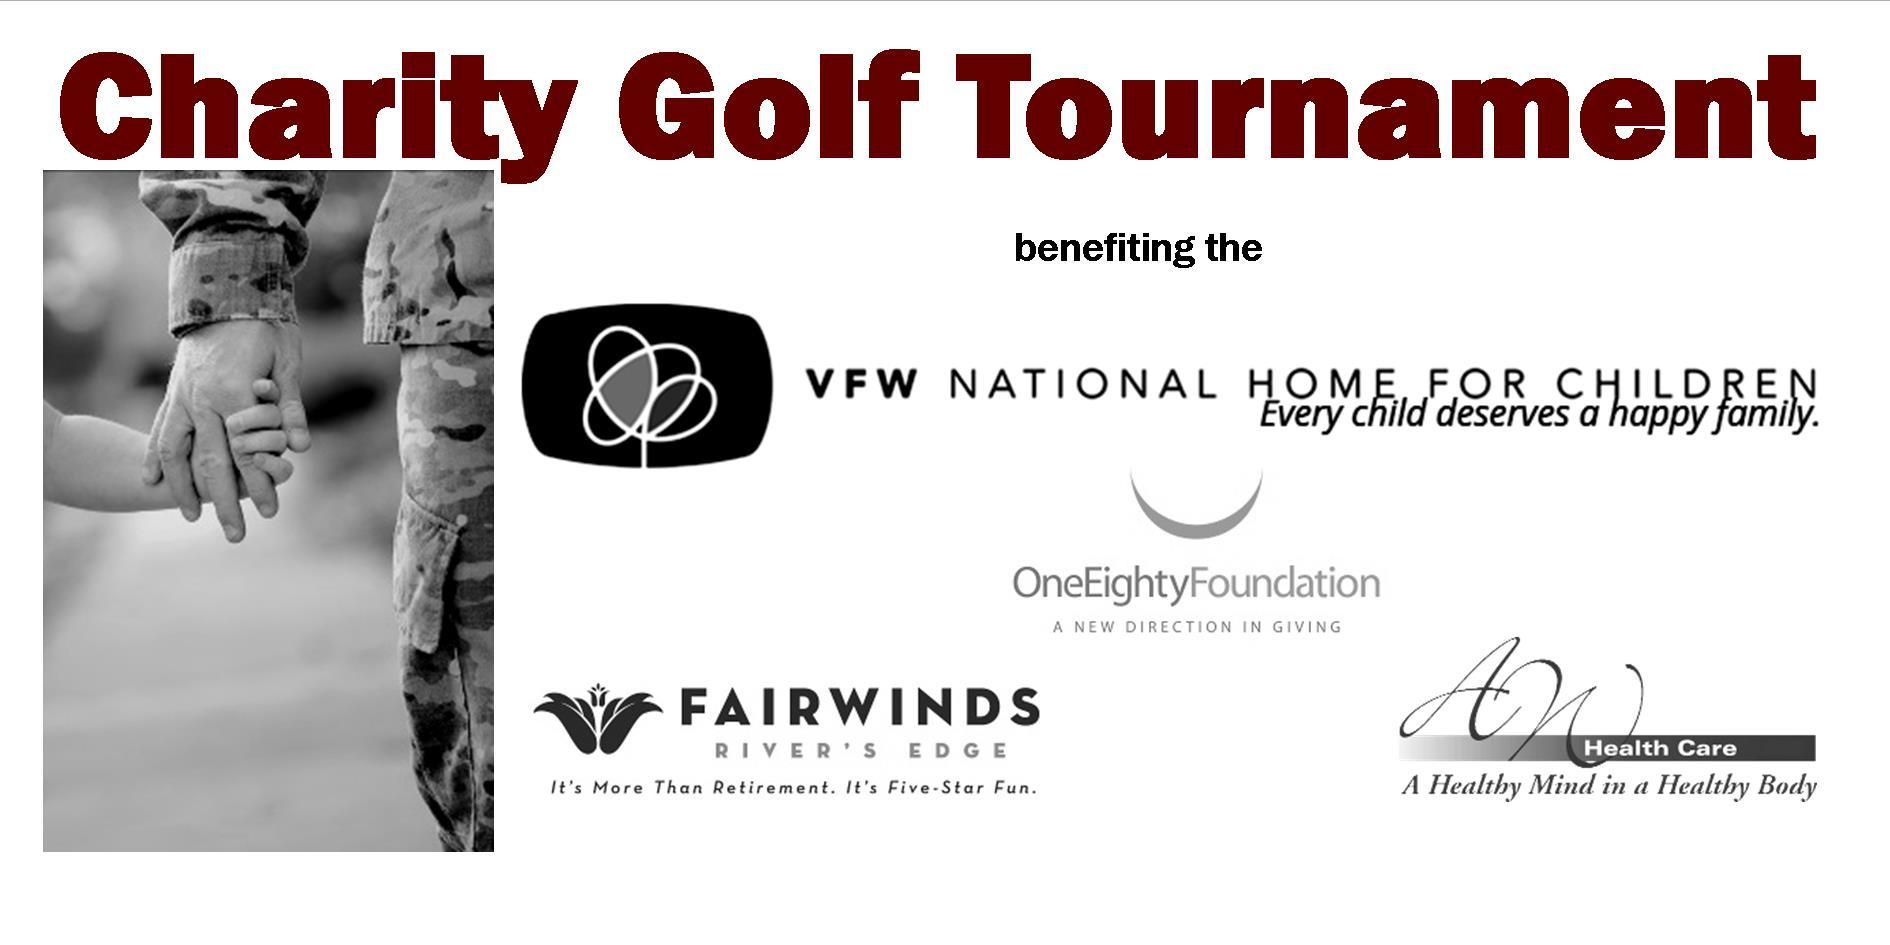 Fairwinds River's Edge/AW Charity Golf Tournament-VFW National Home for Children